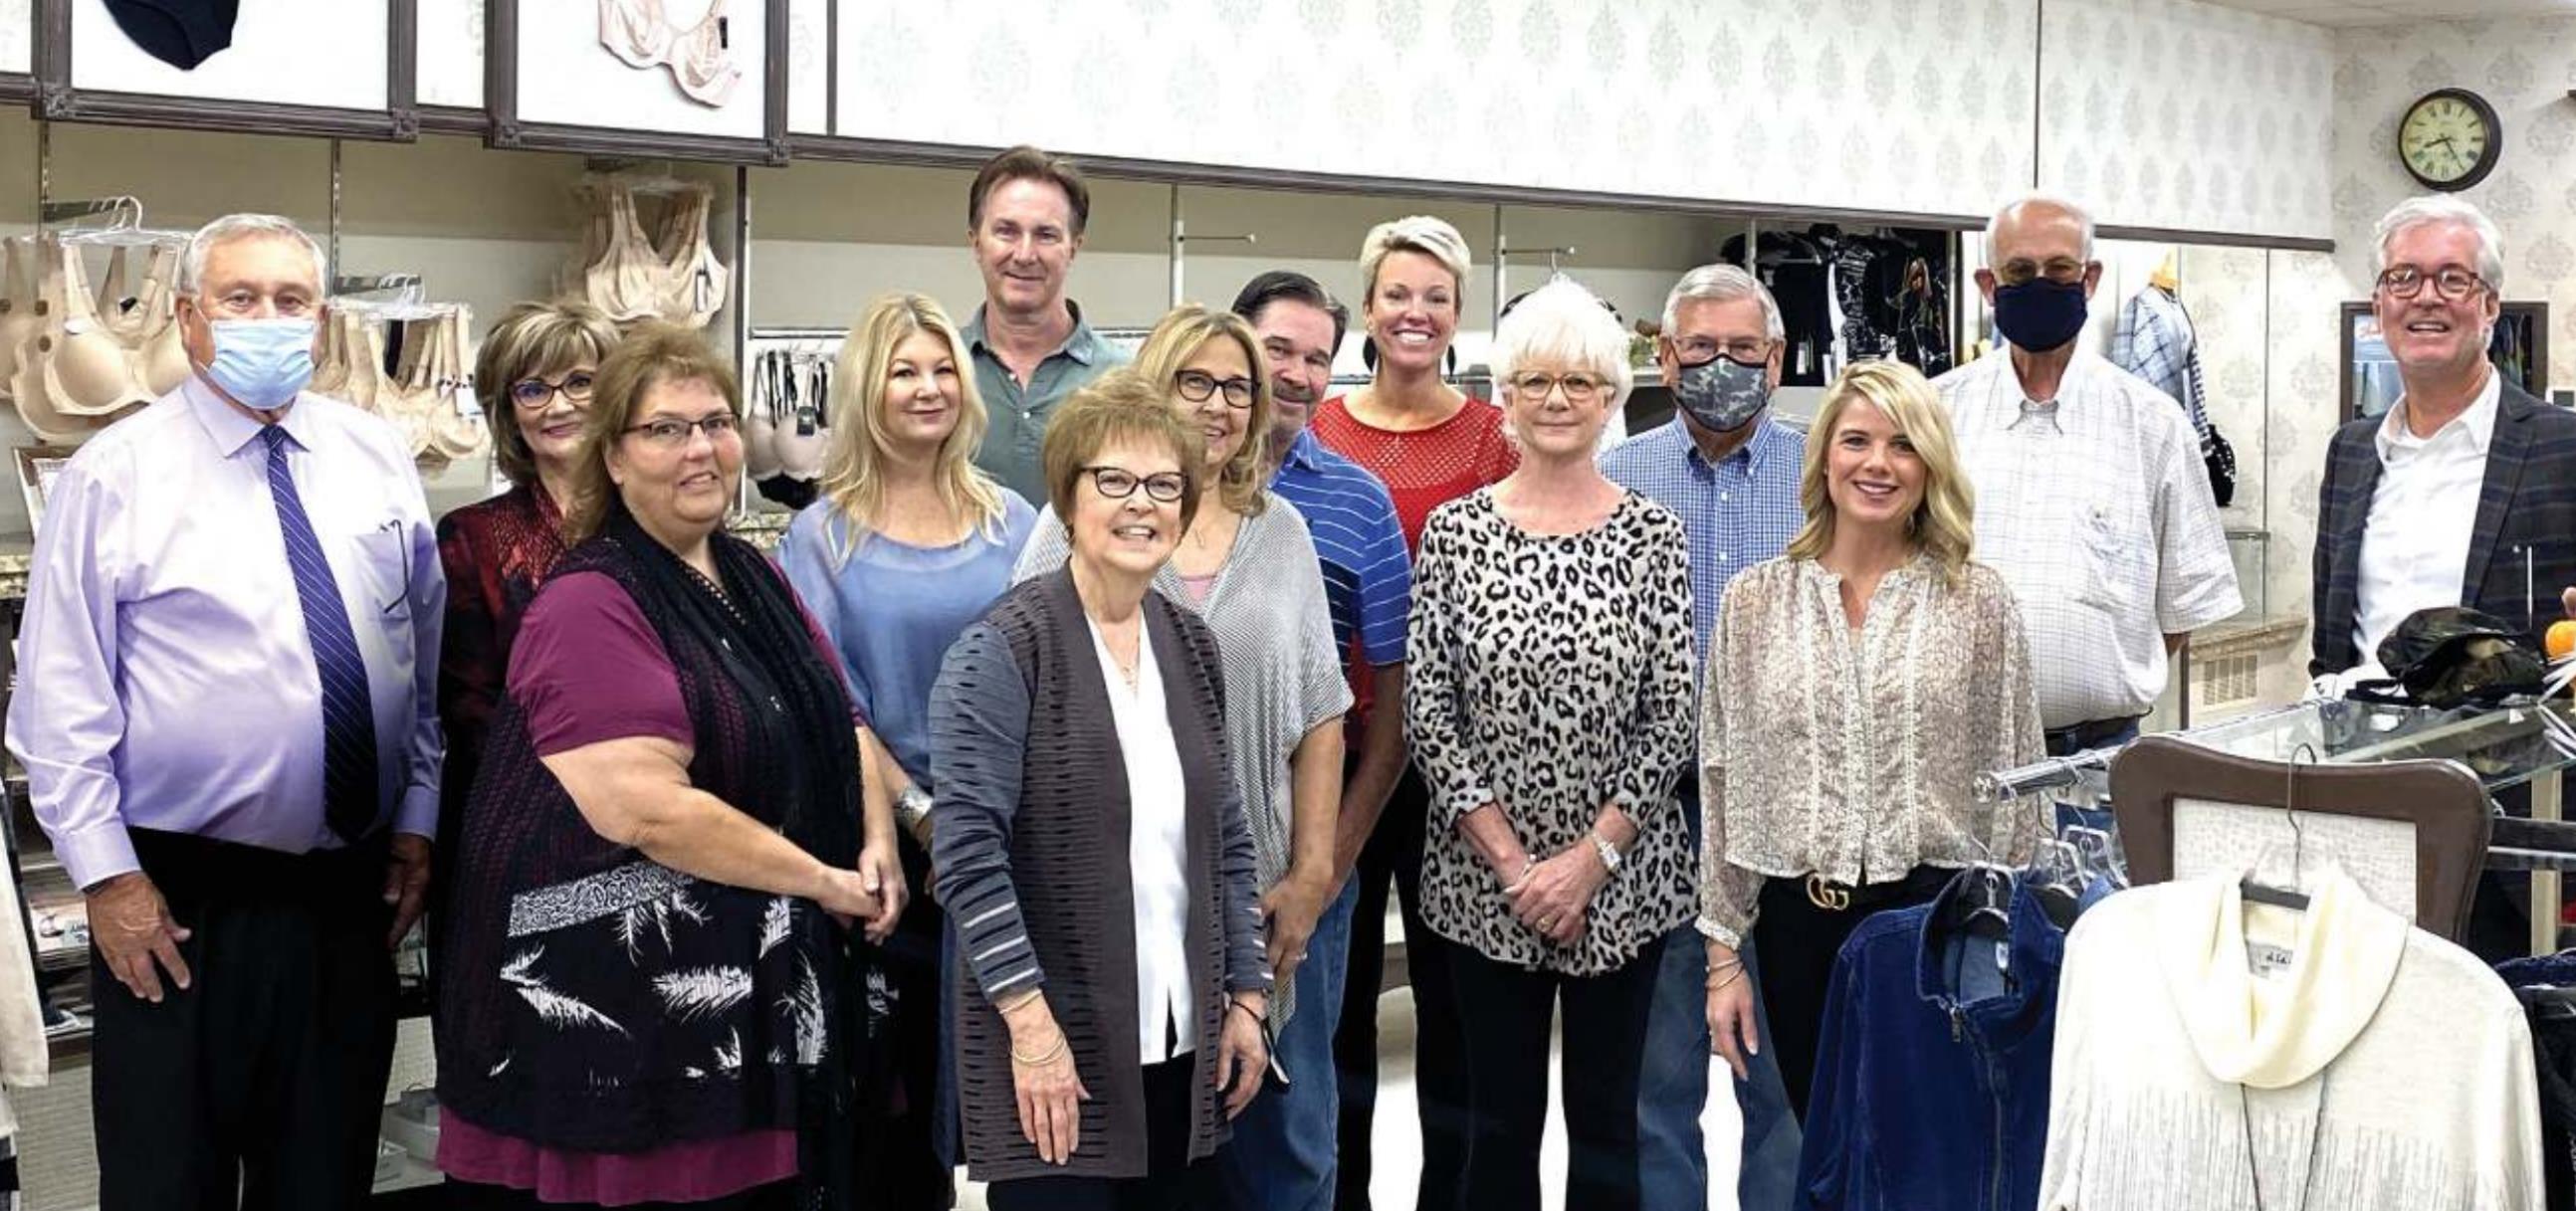 Weatherford business friends honored Martha Sauer, front row second from left, Tuesday morning on her upcoming retirement after 47 years as owner of The Kloset. Timothy Comstock/WDN